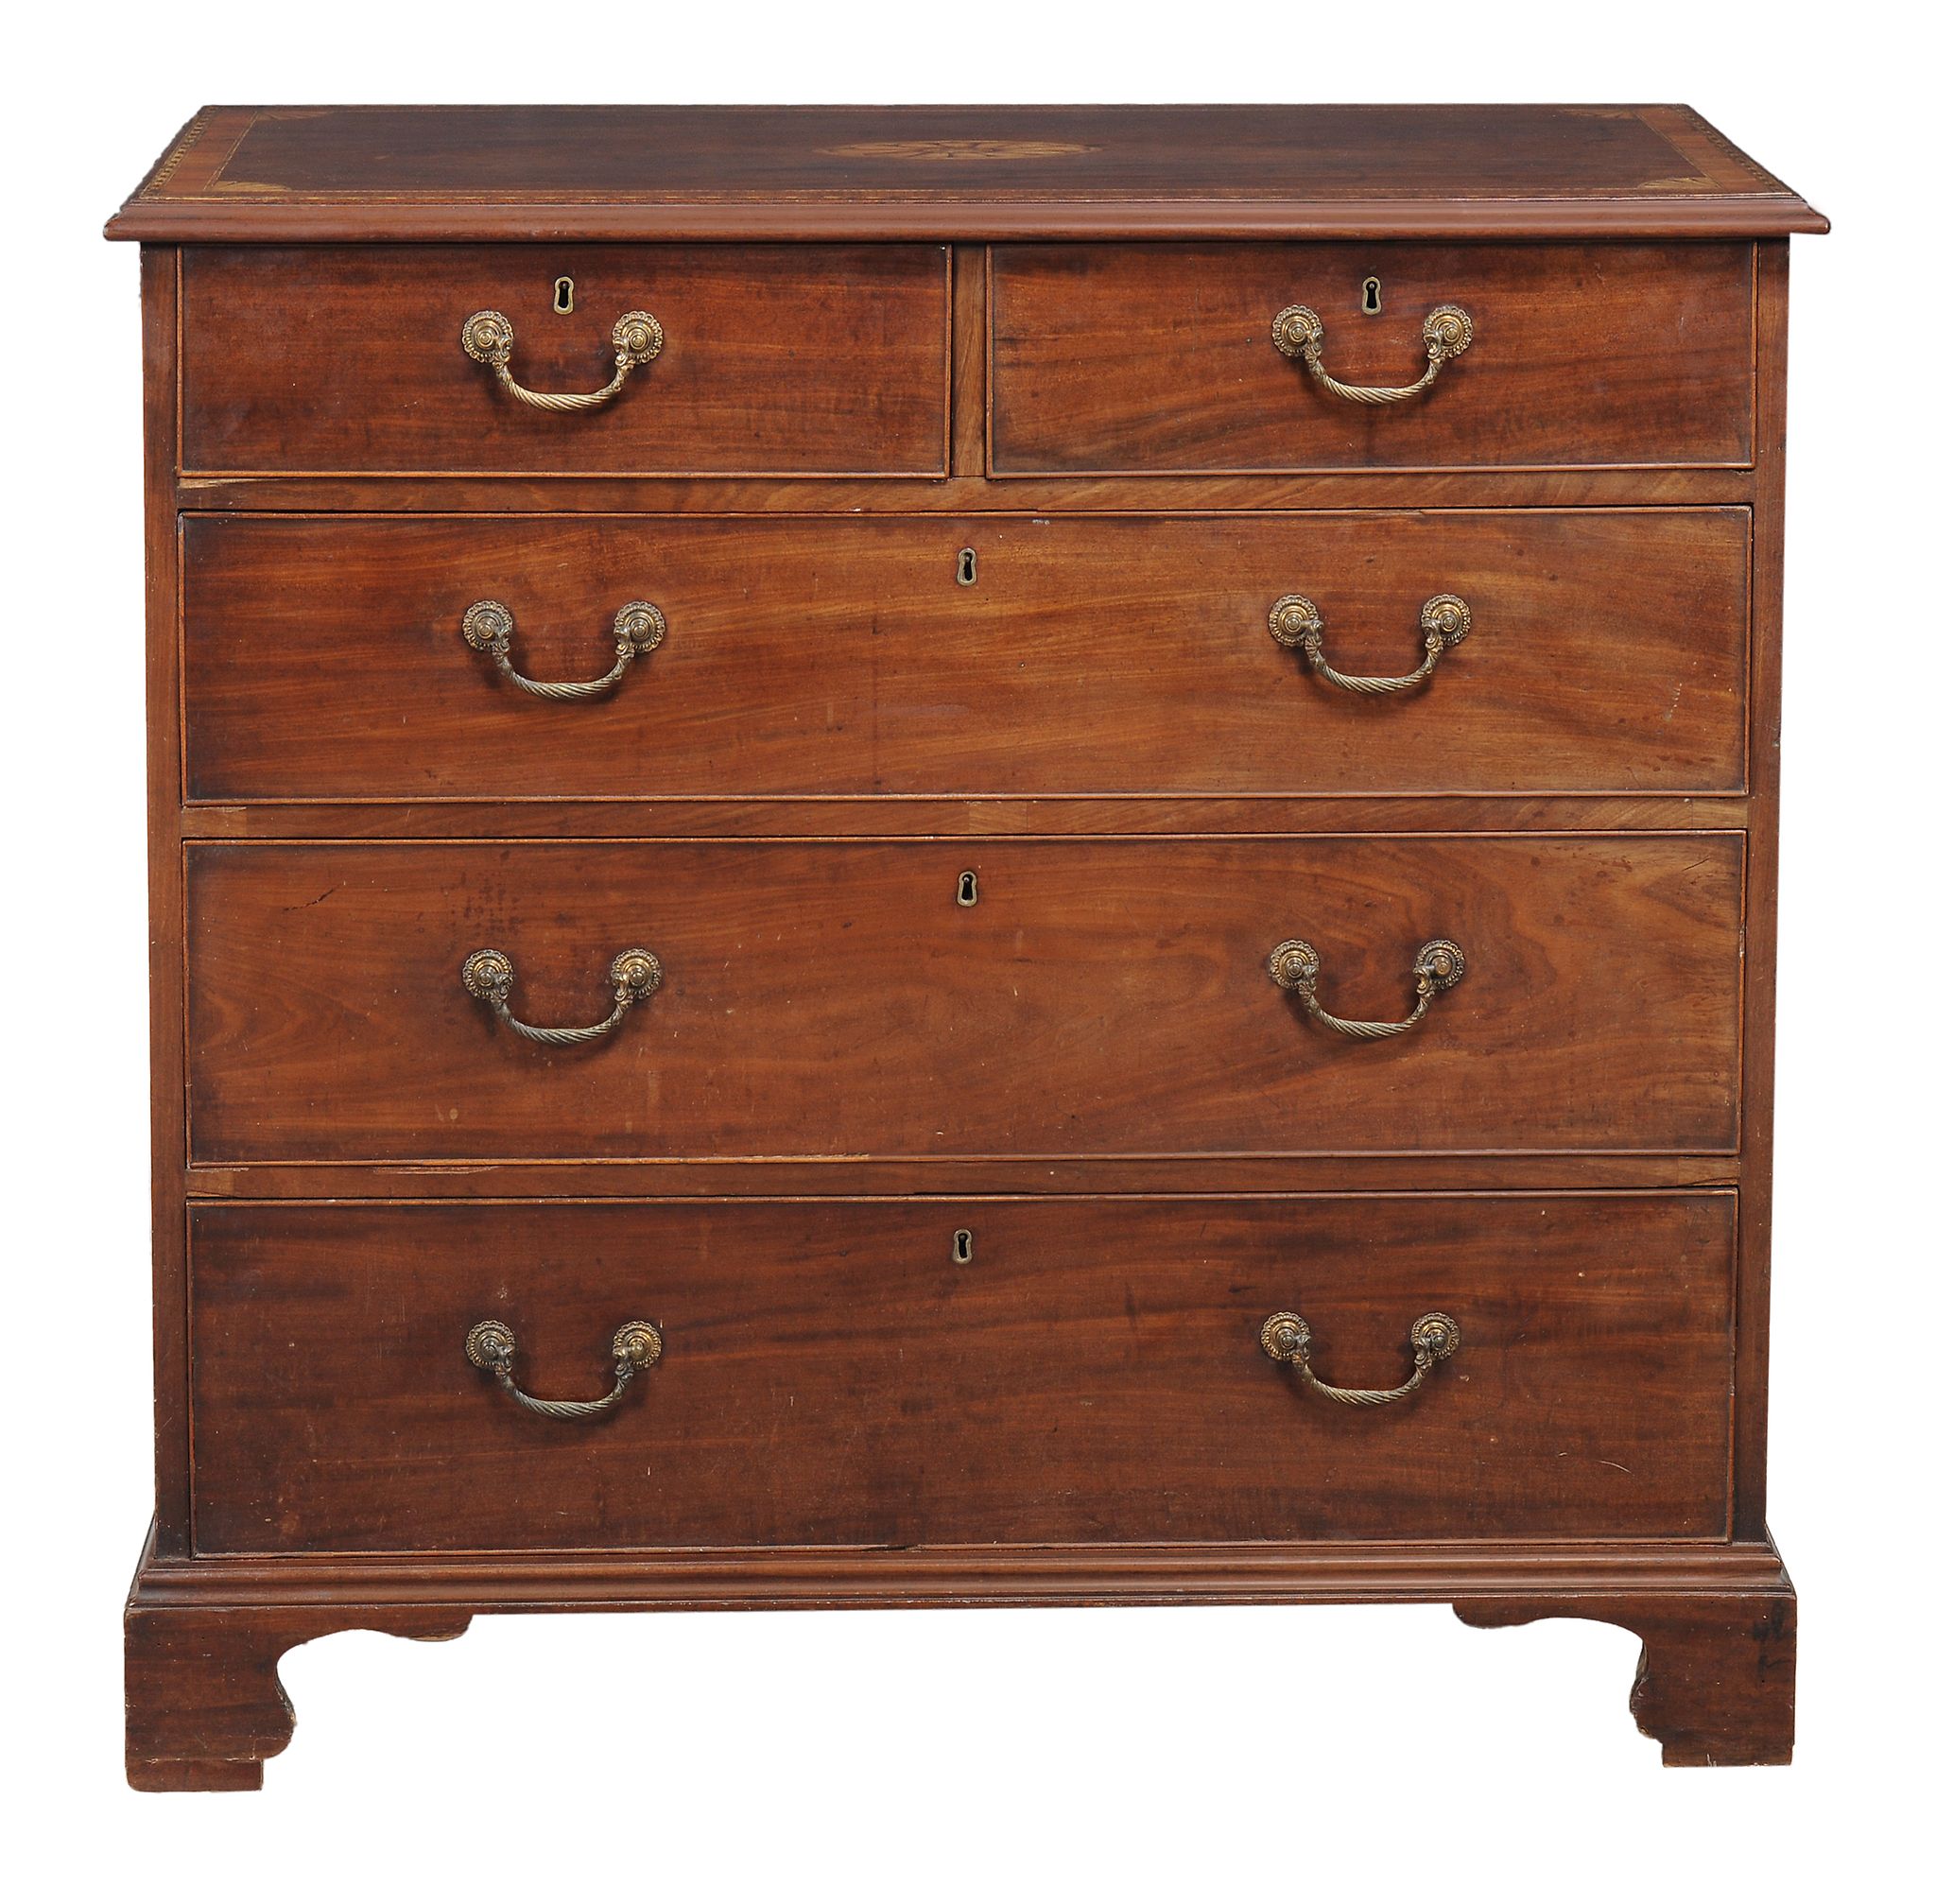 A George III mahogany chest of drawers circa 1780 crossbanded and chevron...  A George III